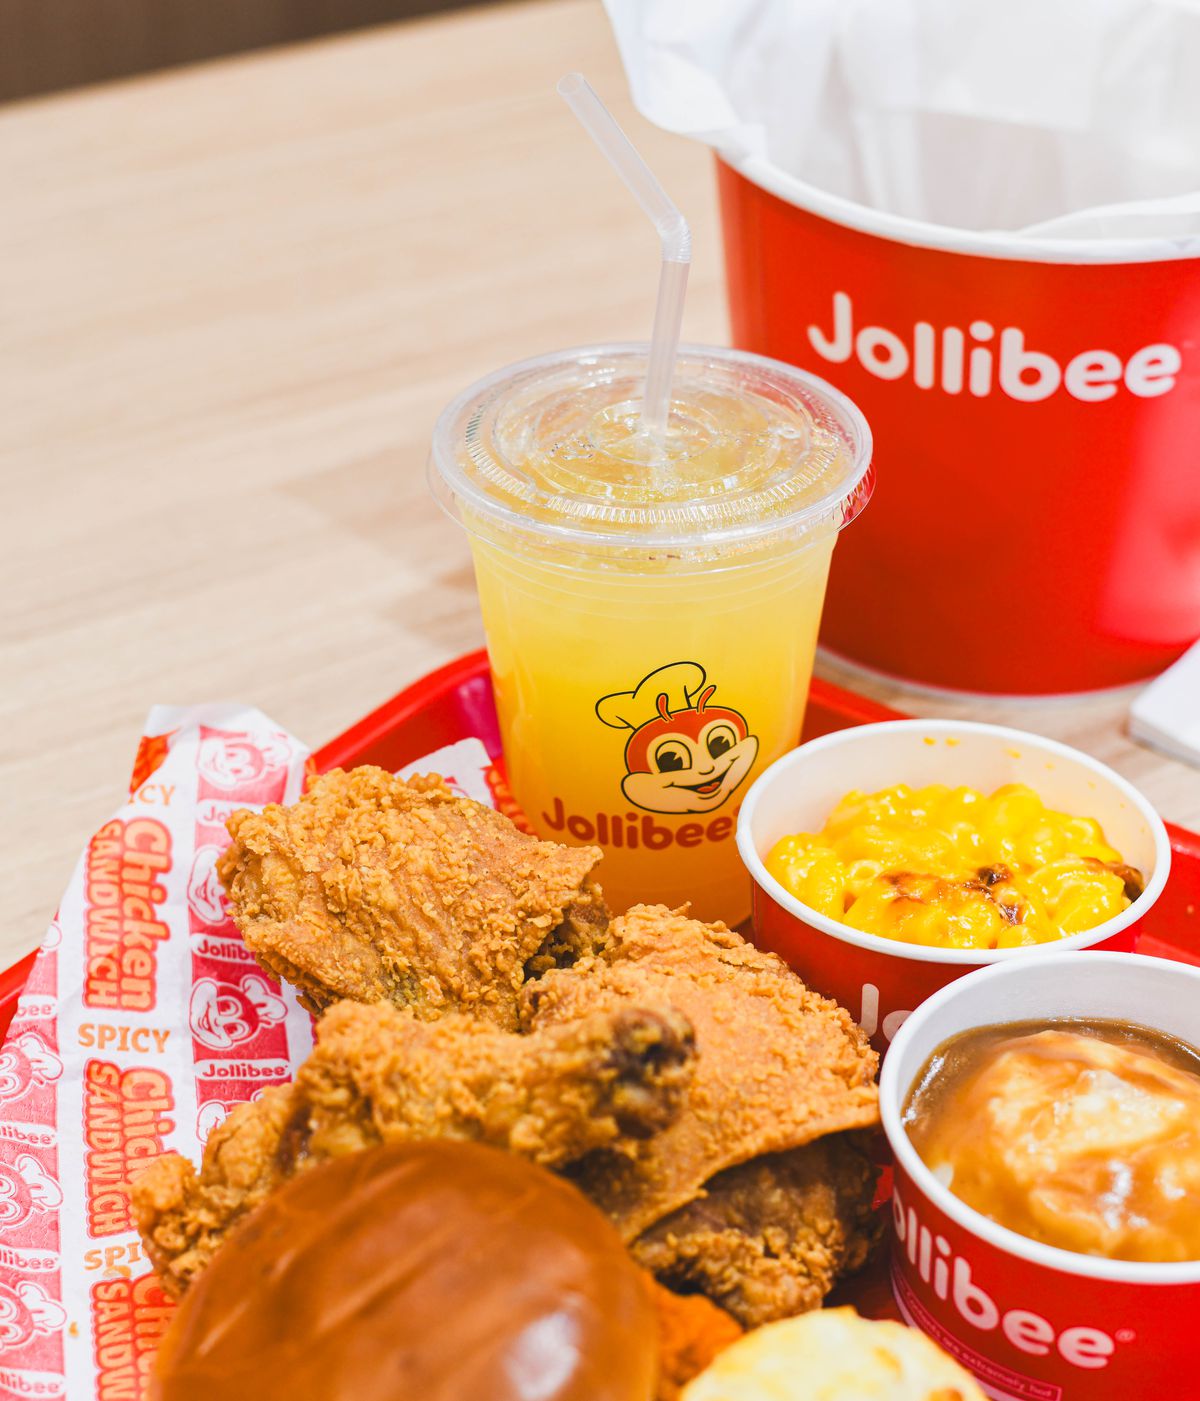 Fried chicken, mashed potatoes and gravy and mac and cheese in red and white cups, a yellow liquid in a clear cup with a red bee wearing a chef hat and Jollibee in red printed on it and a bun set on a red tray with multi-colored liner and a red and white Jollibee bucket set next to it on a light surface.